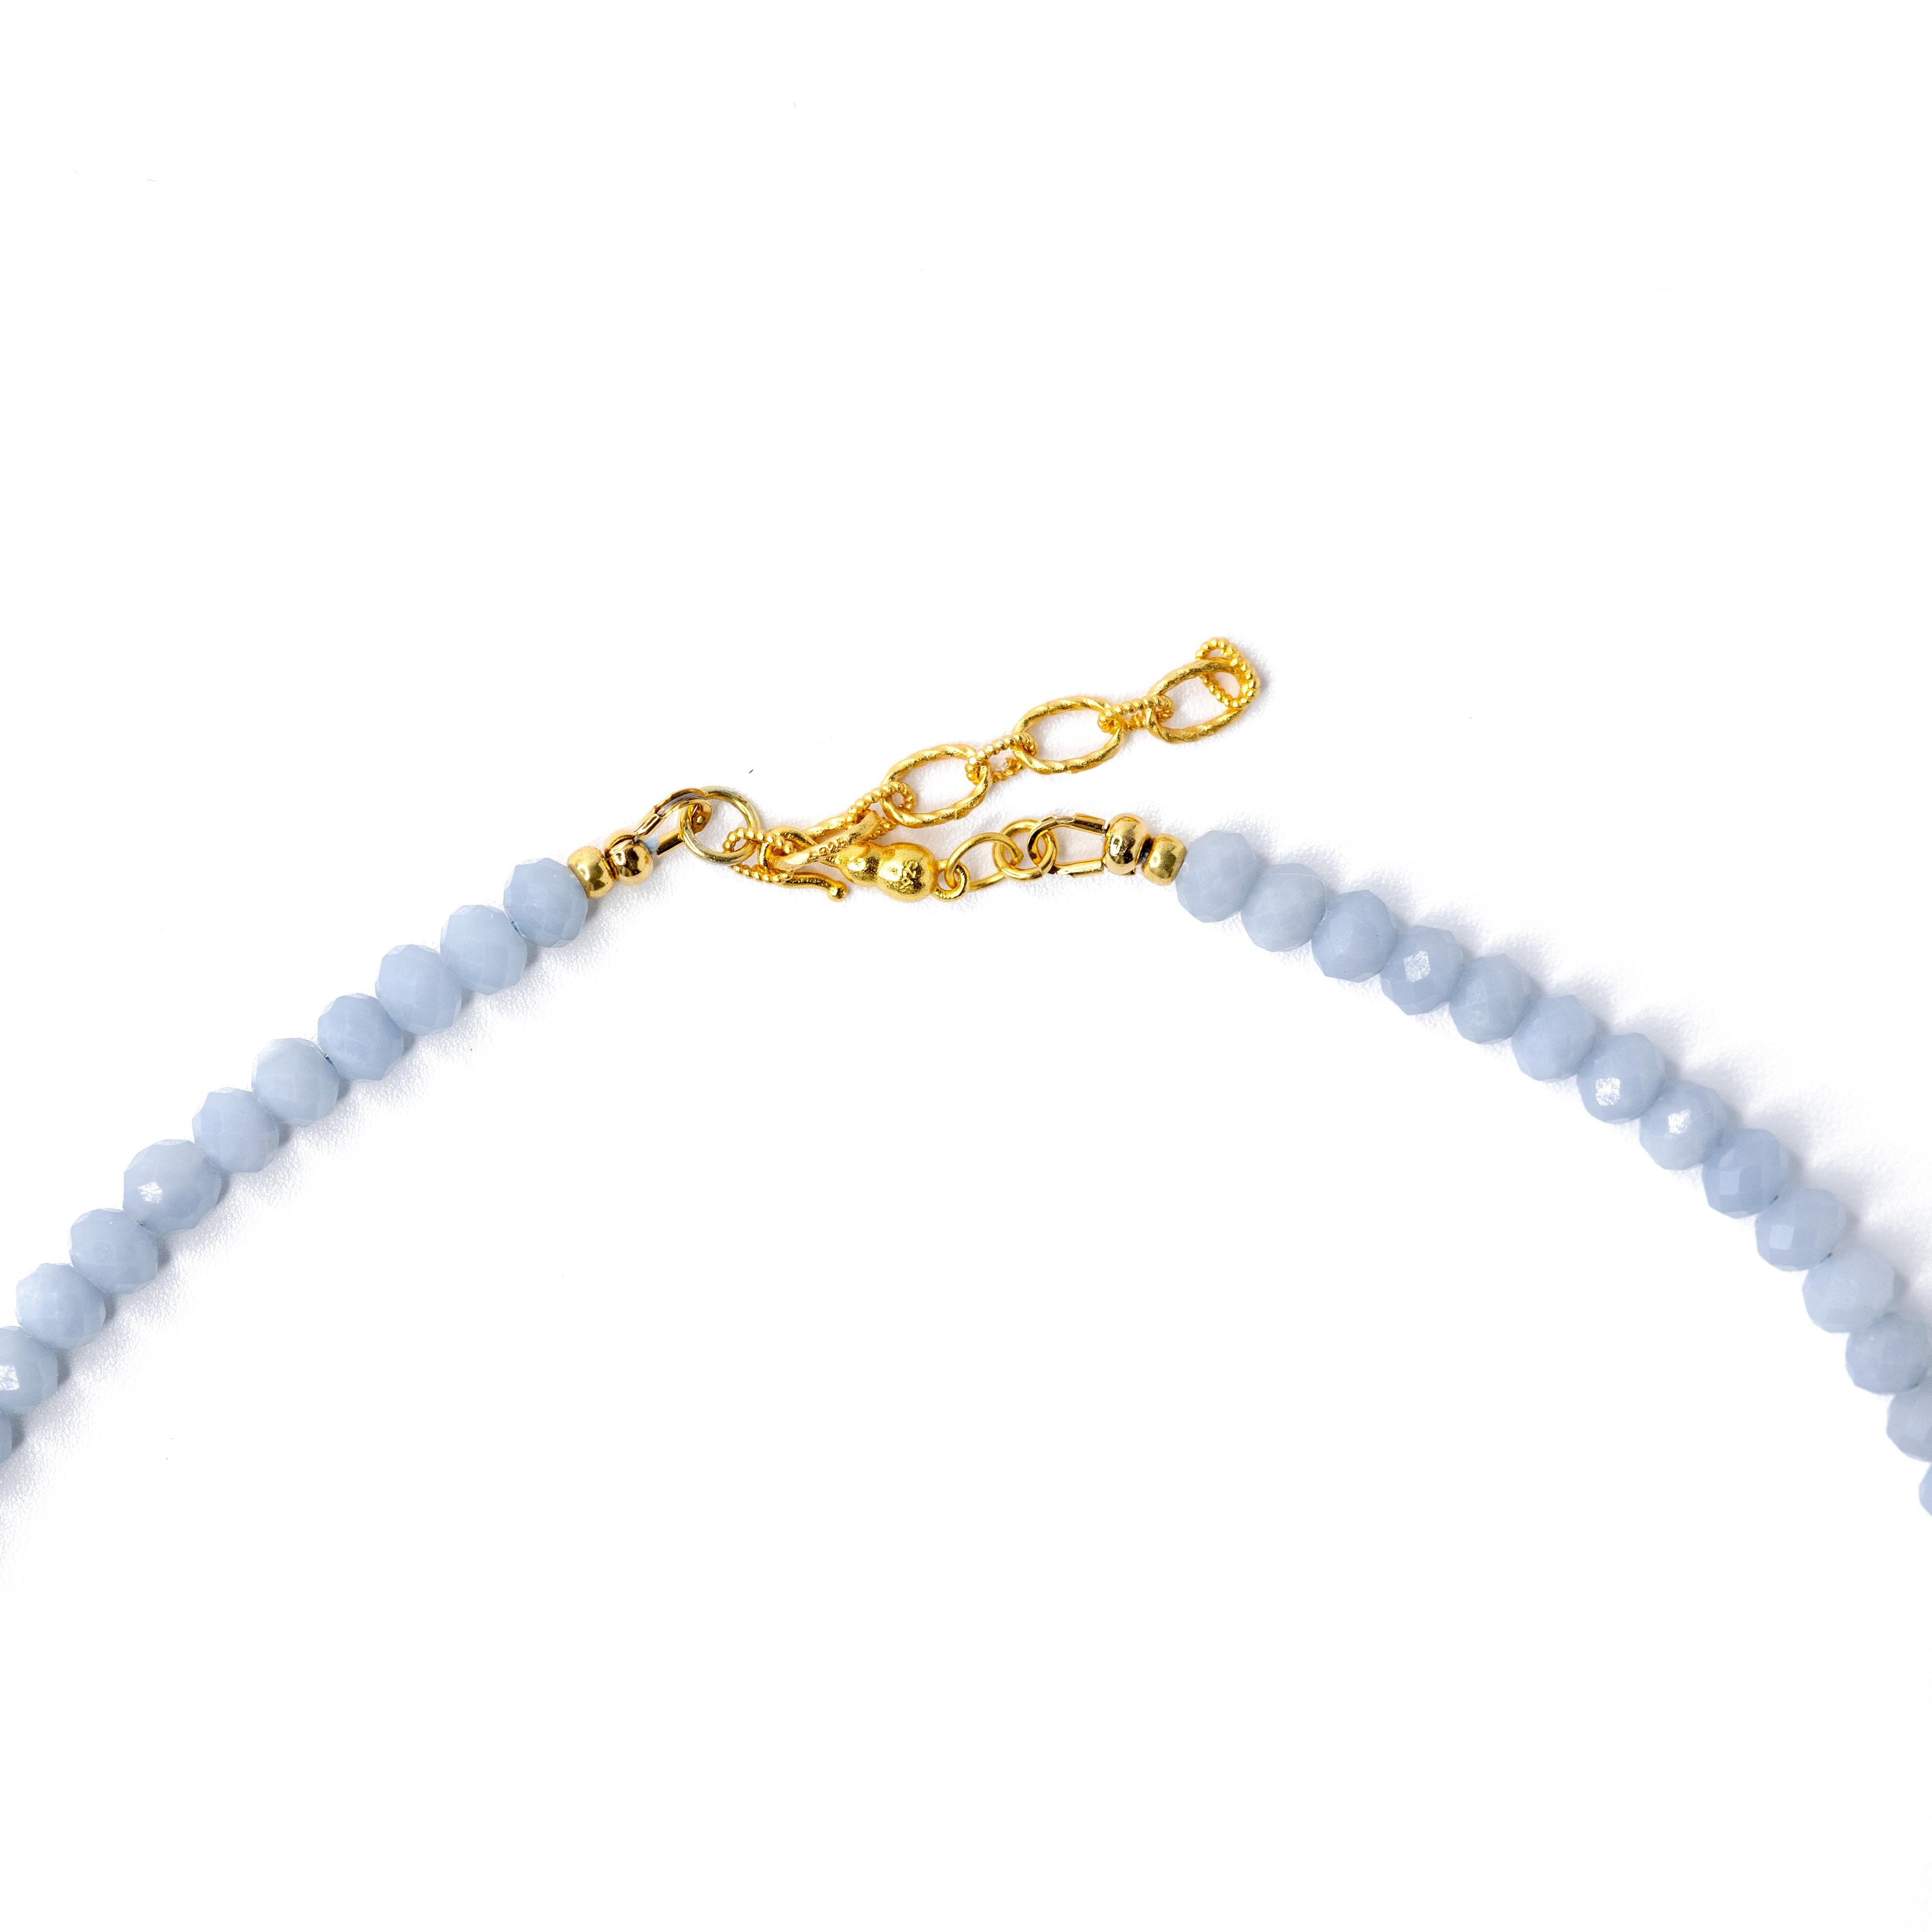 Decorate your neckline with this stunning Baby Blue Angelite Gold Beaded Choker Necklace, handmade to perfection. Its unique design of beads adds a touch of elegance to your outfit, making it a perfect accessory for any casual occasion.

17